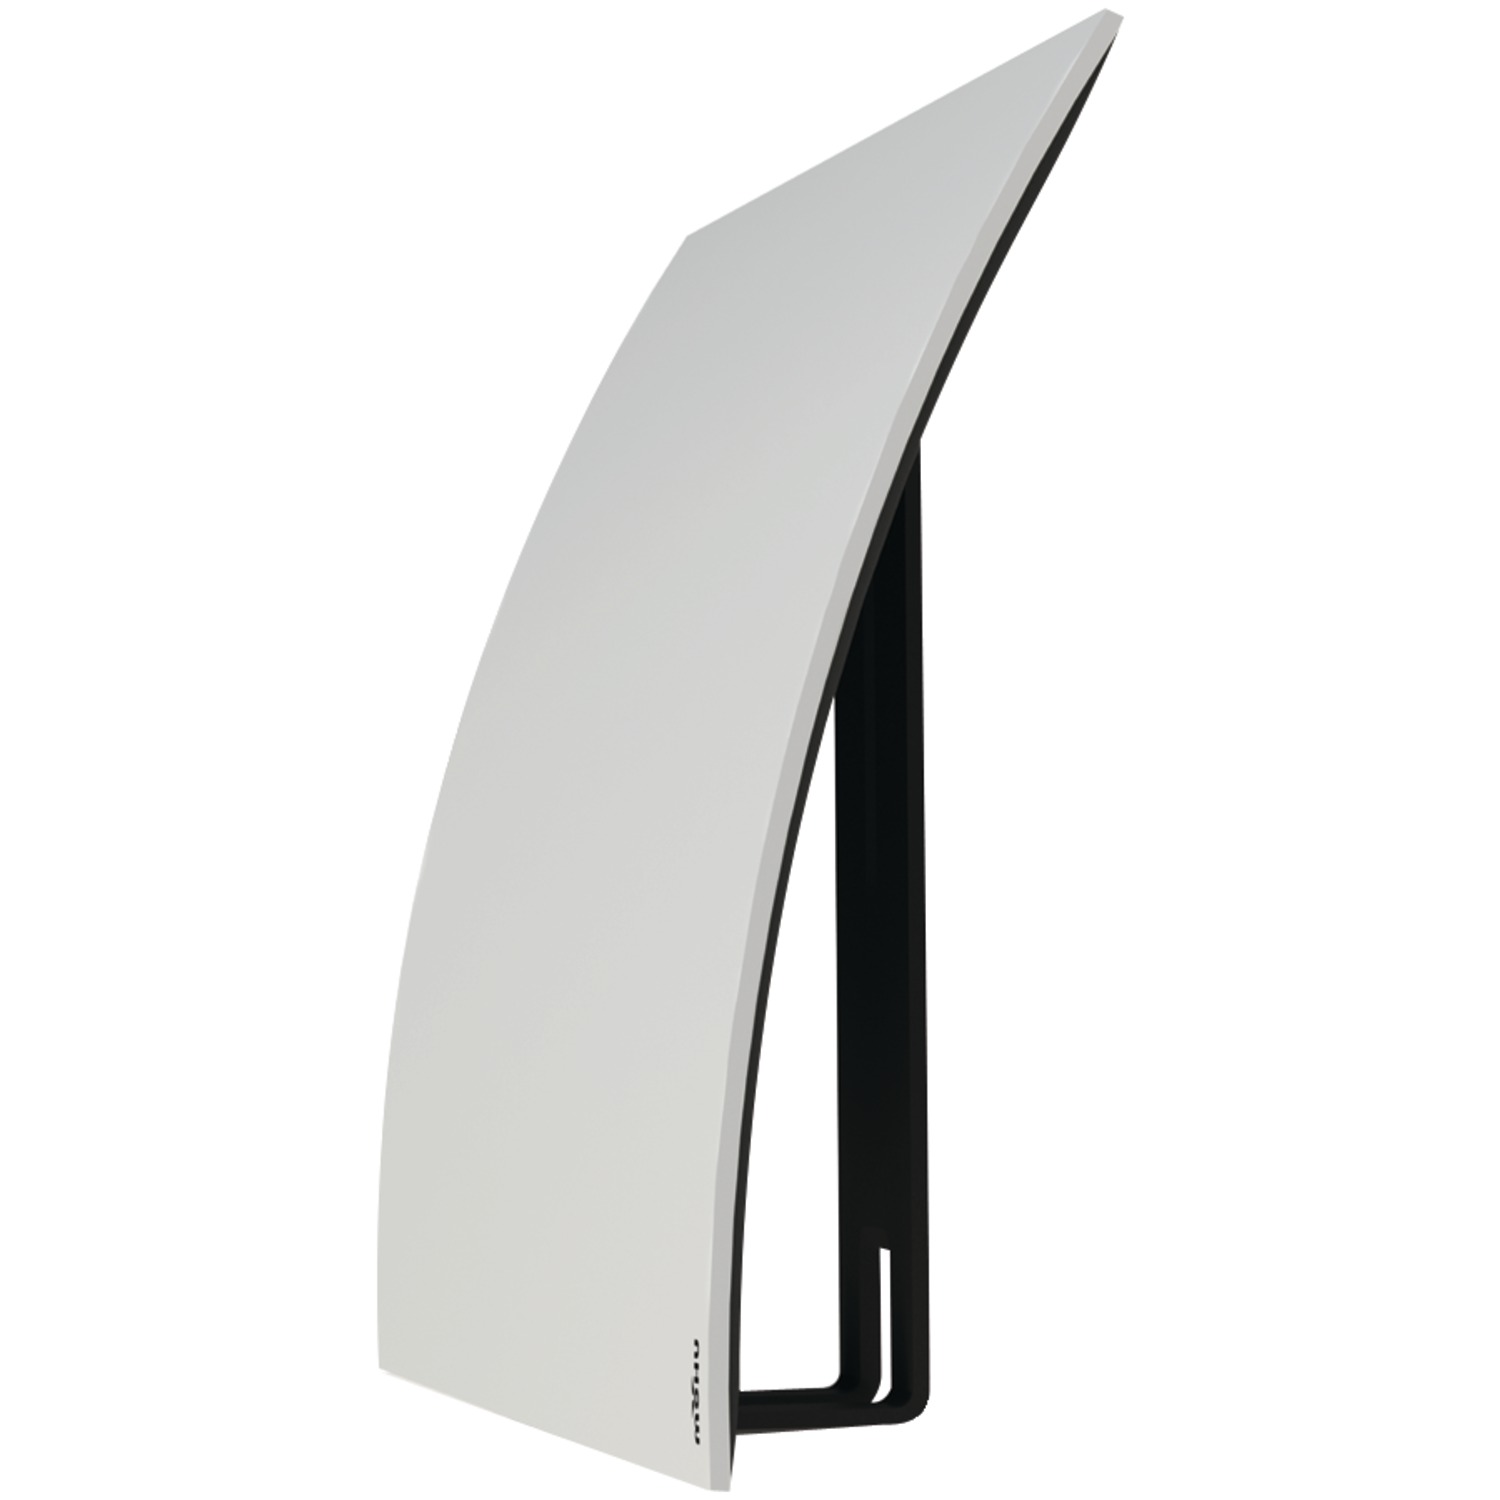 Mohu Curve 30 Designer Table Top 30-Mile Indoor HDTV Antenna - image 4 of 15